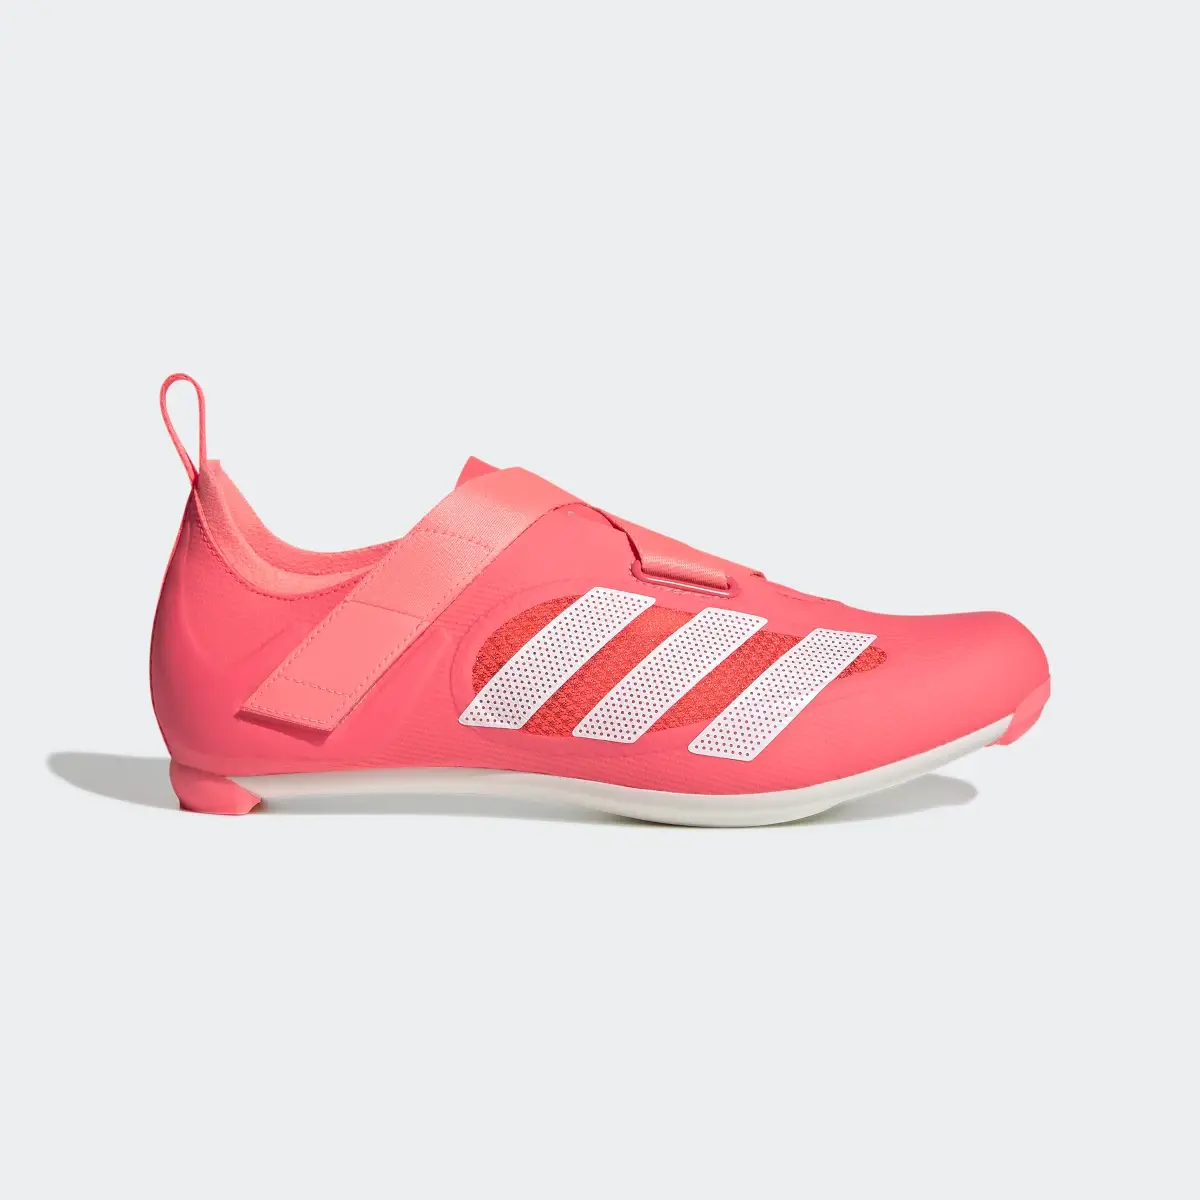 Adidas THE INDOOR CYCLING SHOE. 2